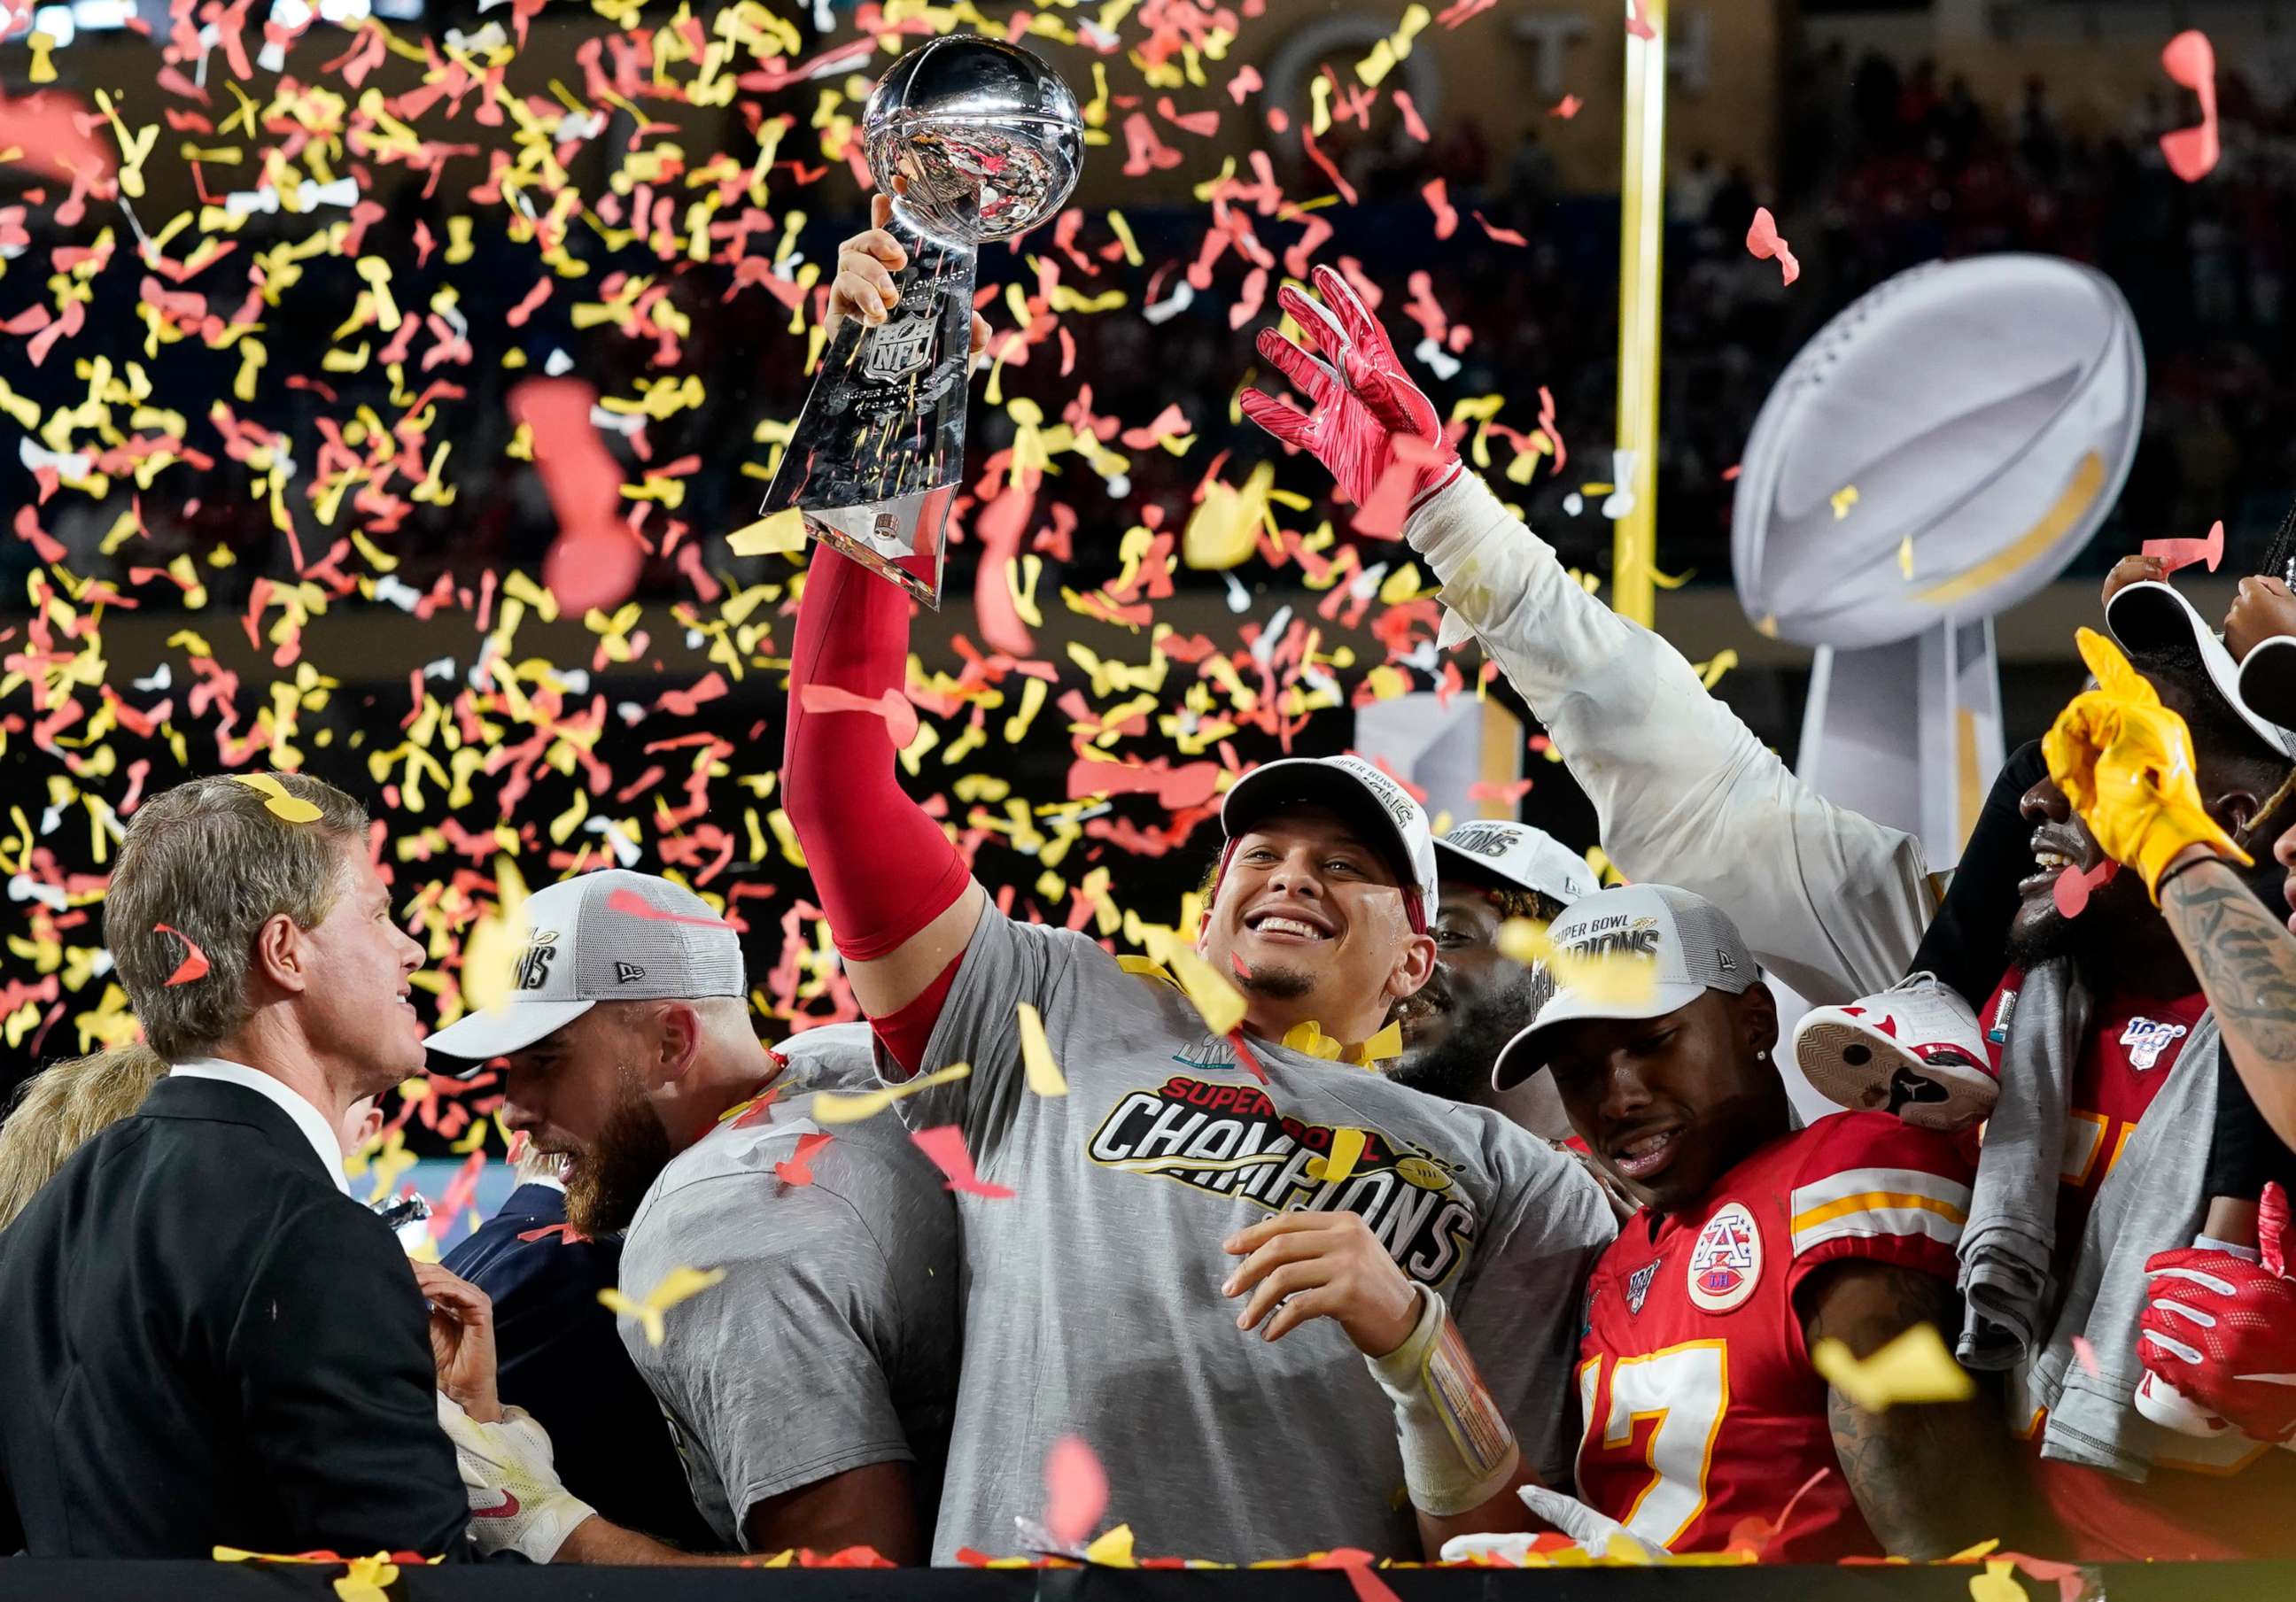 PHOTO: Kansas City Chiefs' Patrick Mahomes celebrates with the Vince Lombardi trophy after winning the Super Bowl LIV at Hard Rock Stadium in Miami, Feb. 2, 2020.